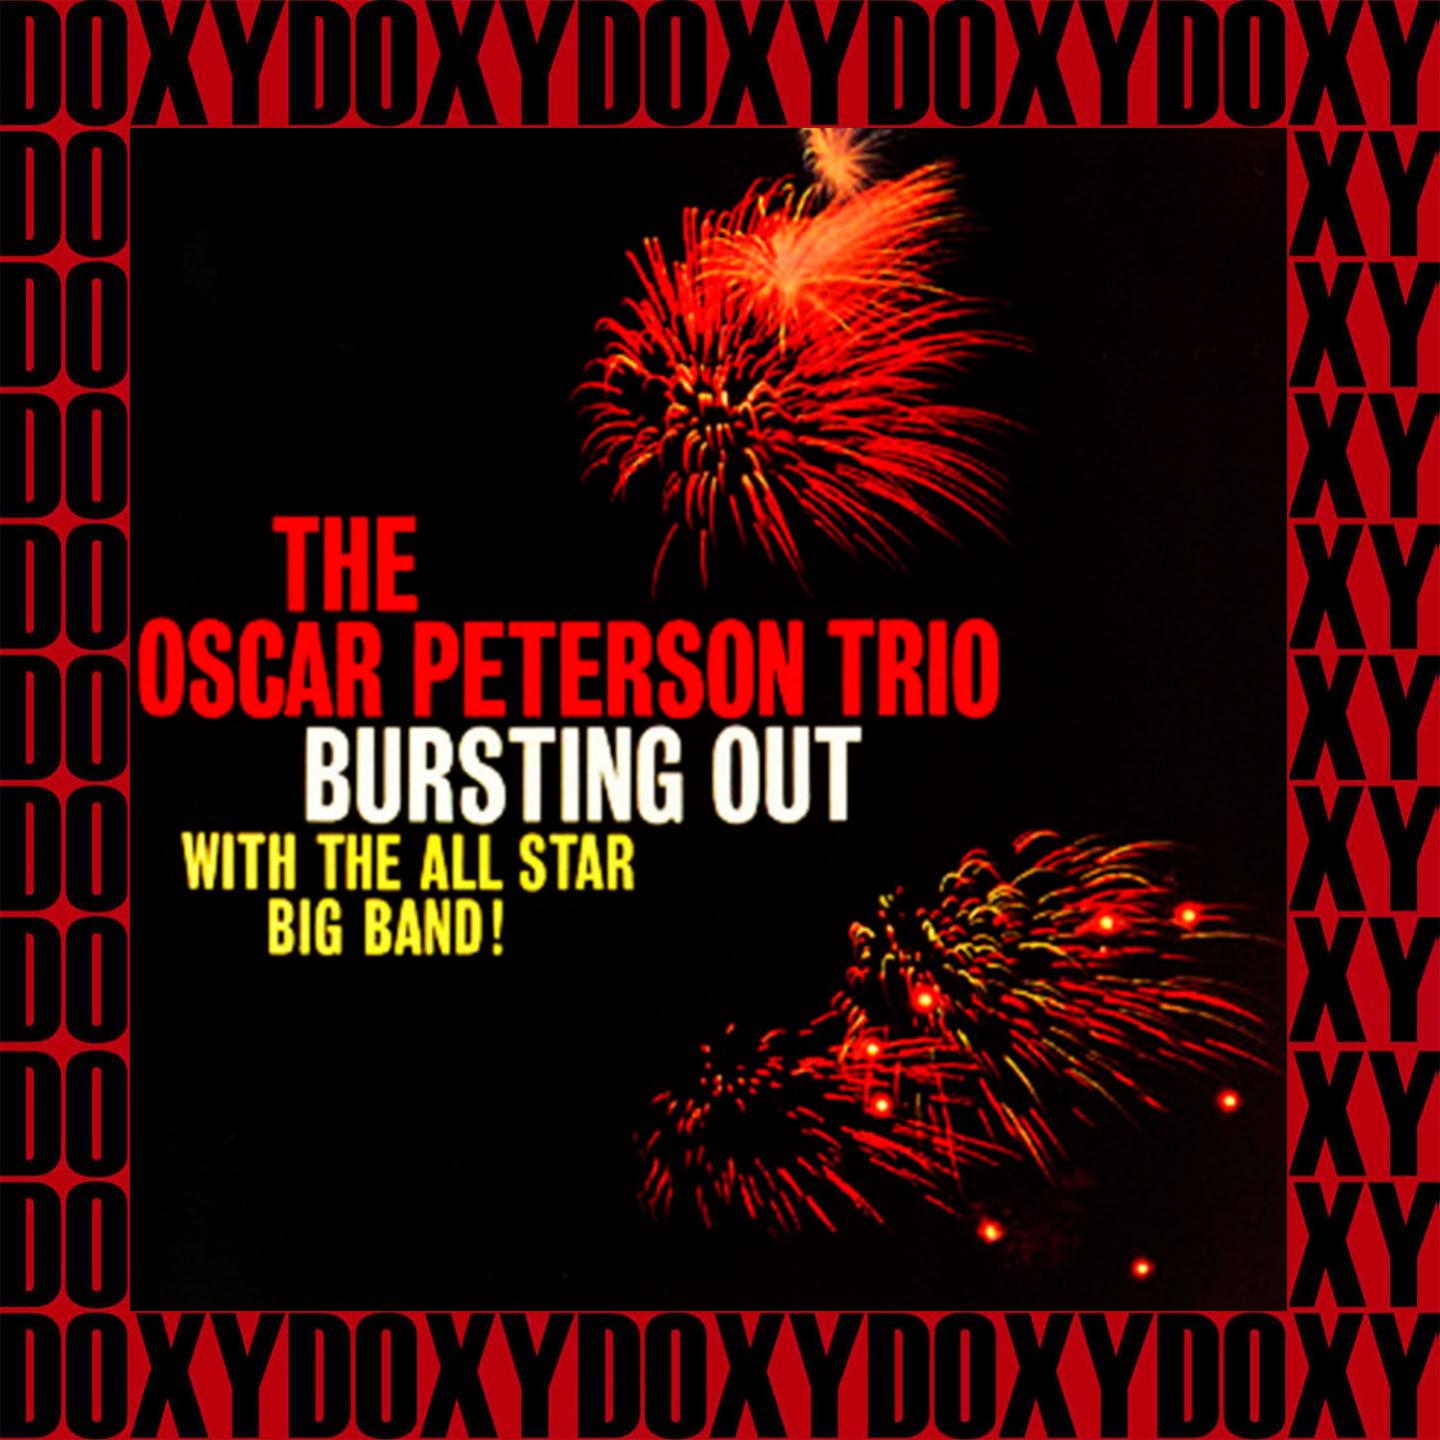 Bursting Out With The All Star Big Band! (Remastered Version) (Doxy Collection)专辑